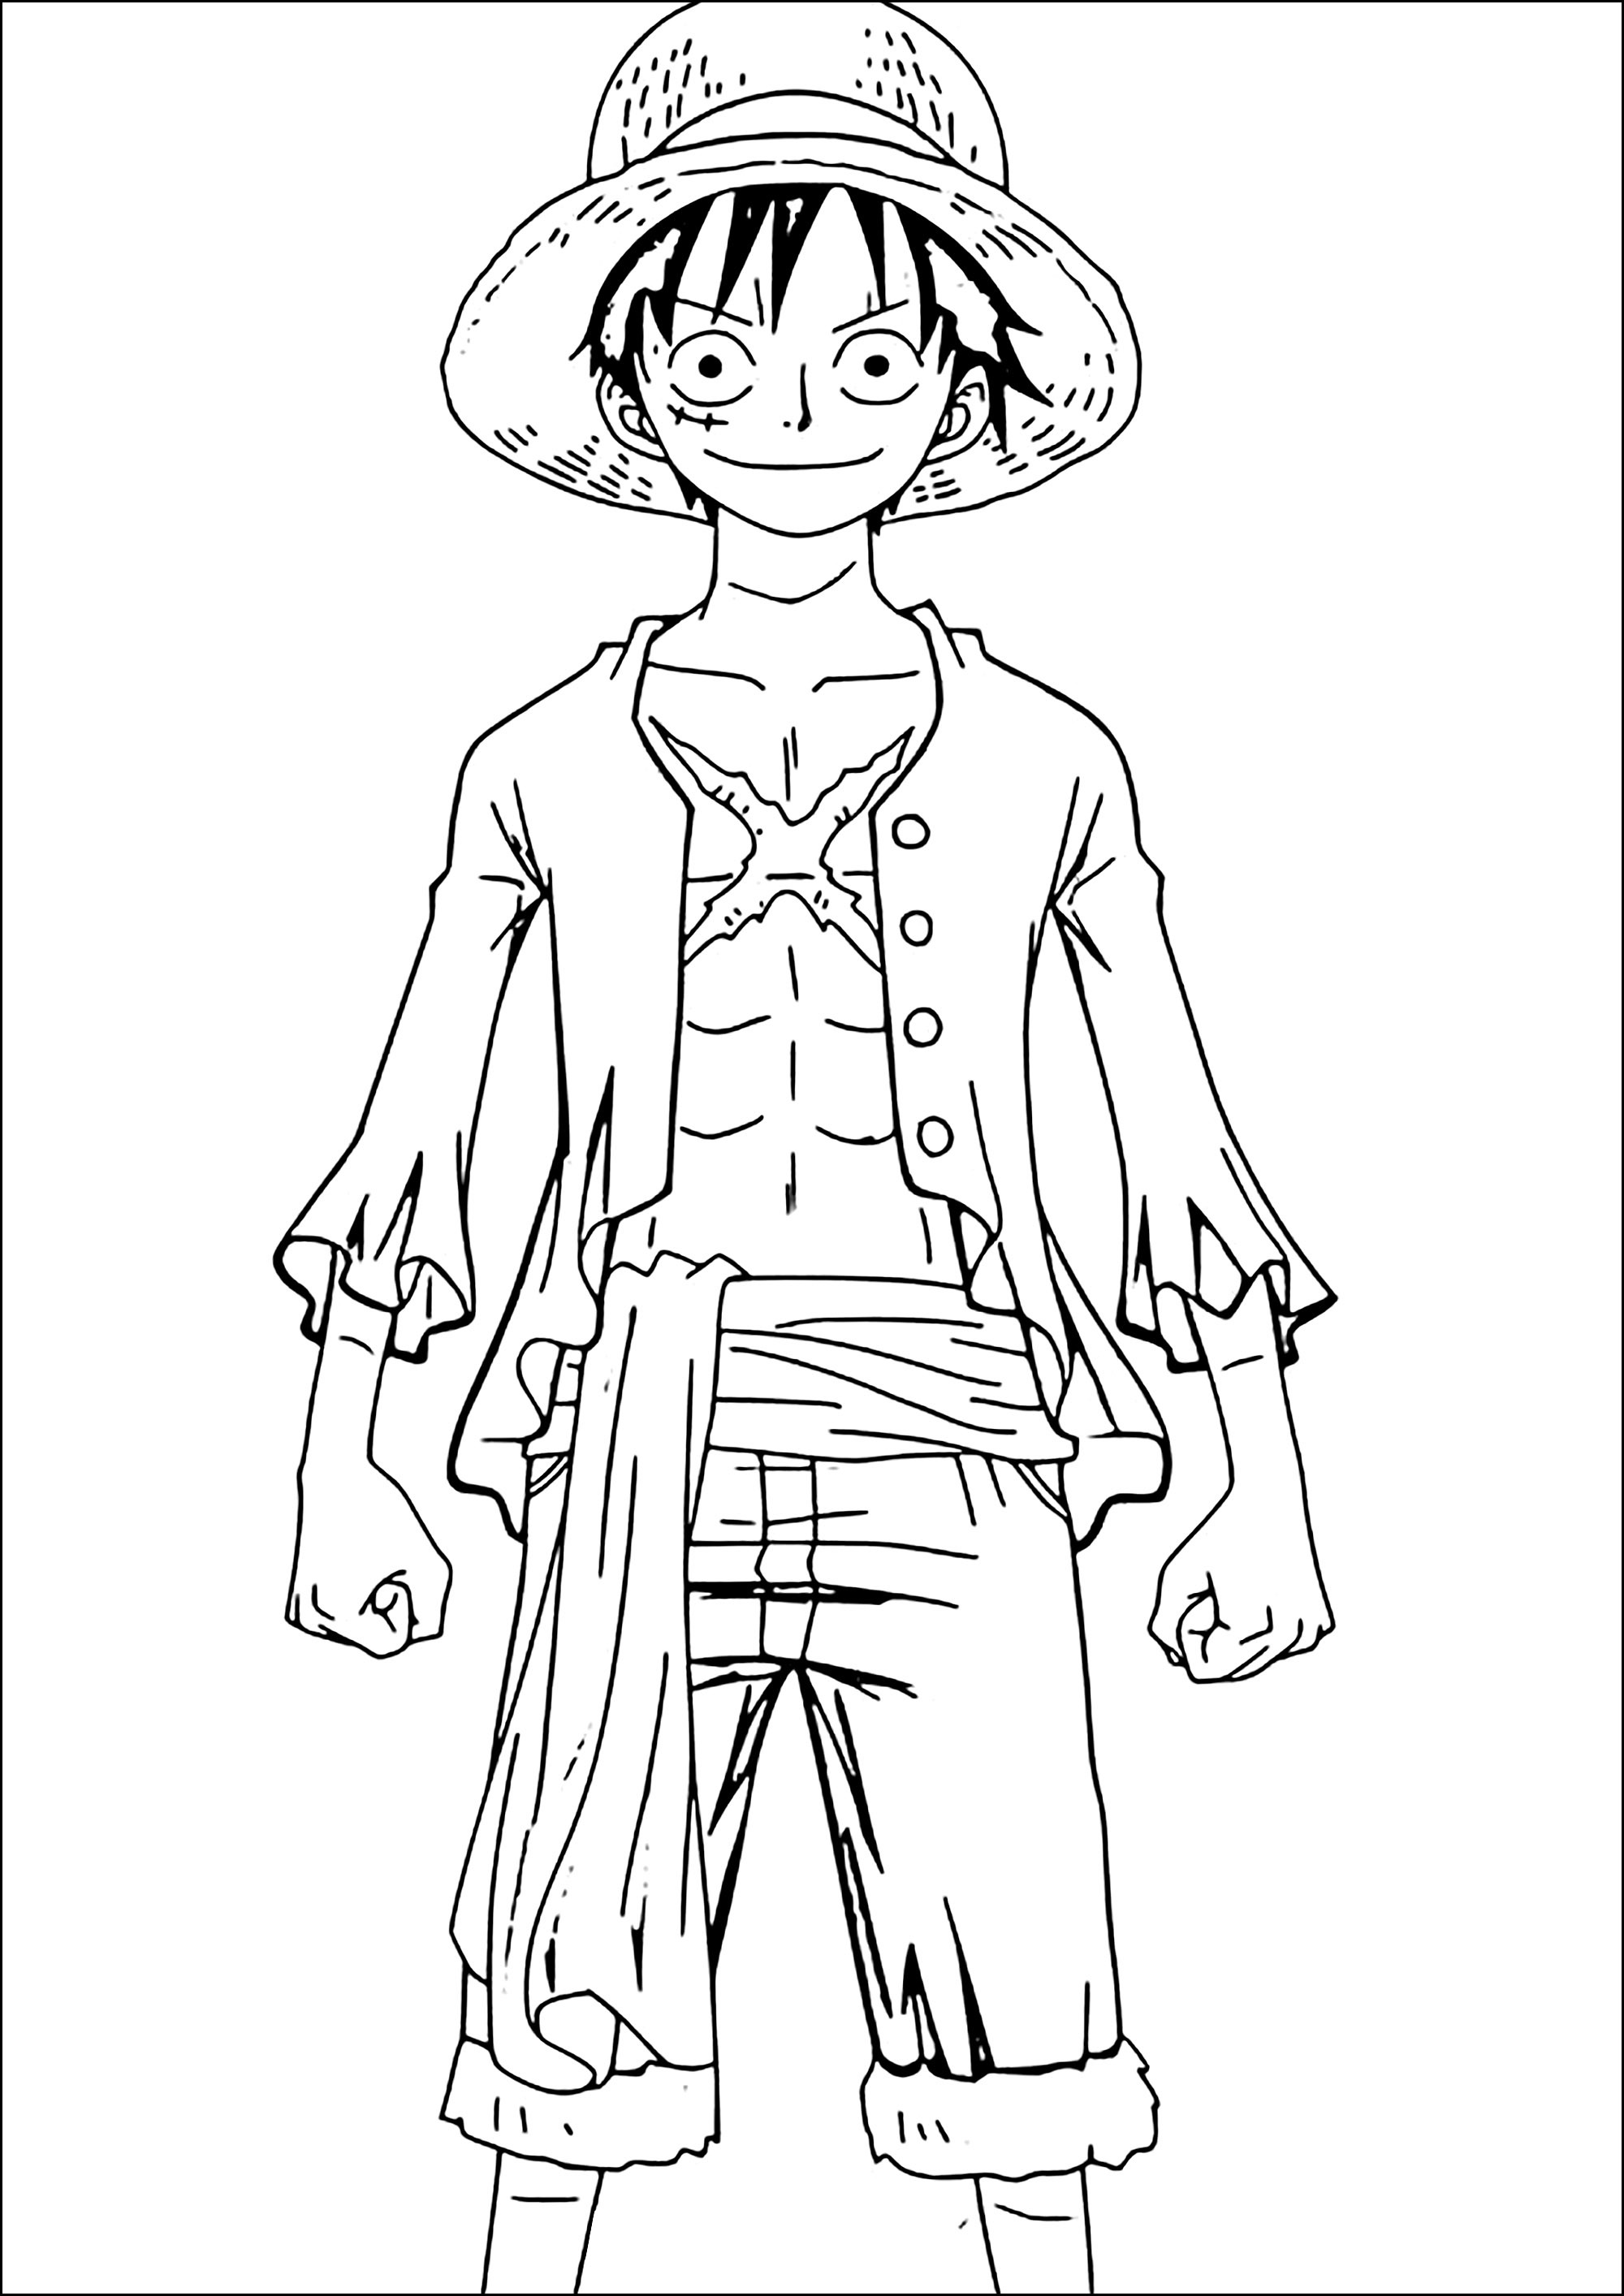 Monkey D. Luffy coloring page - One ...